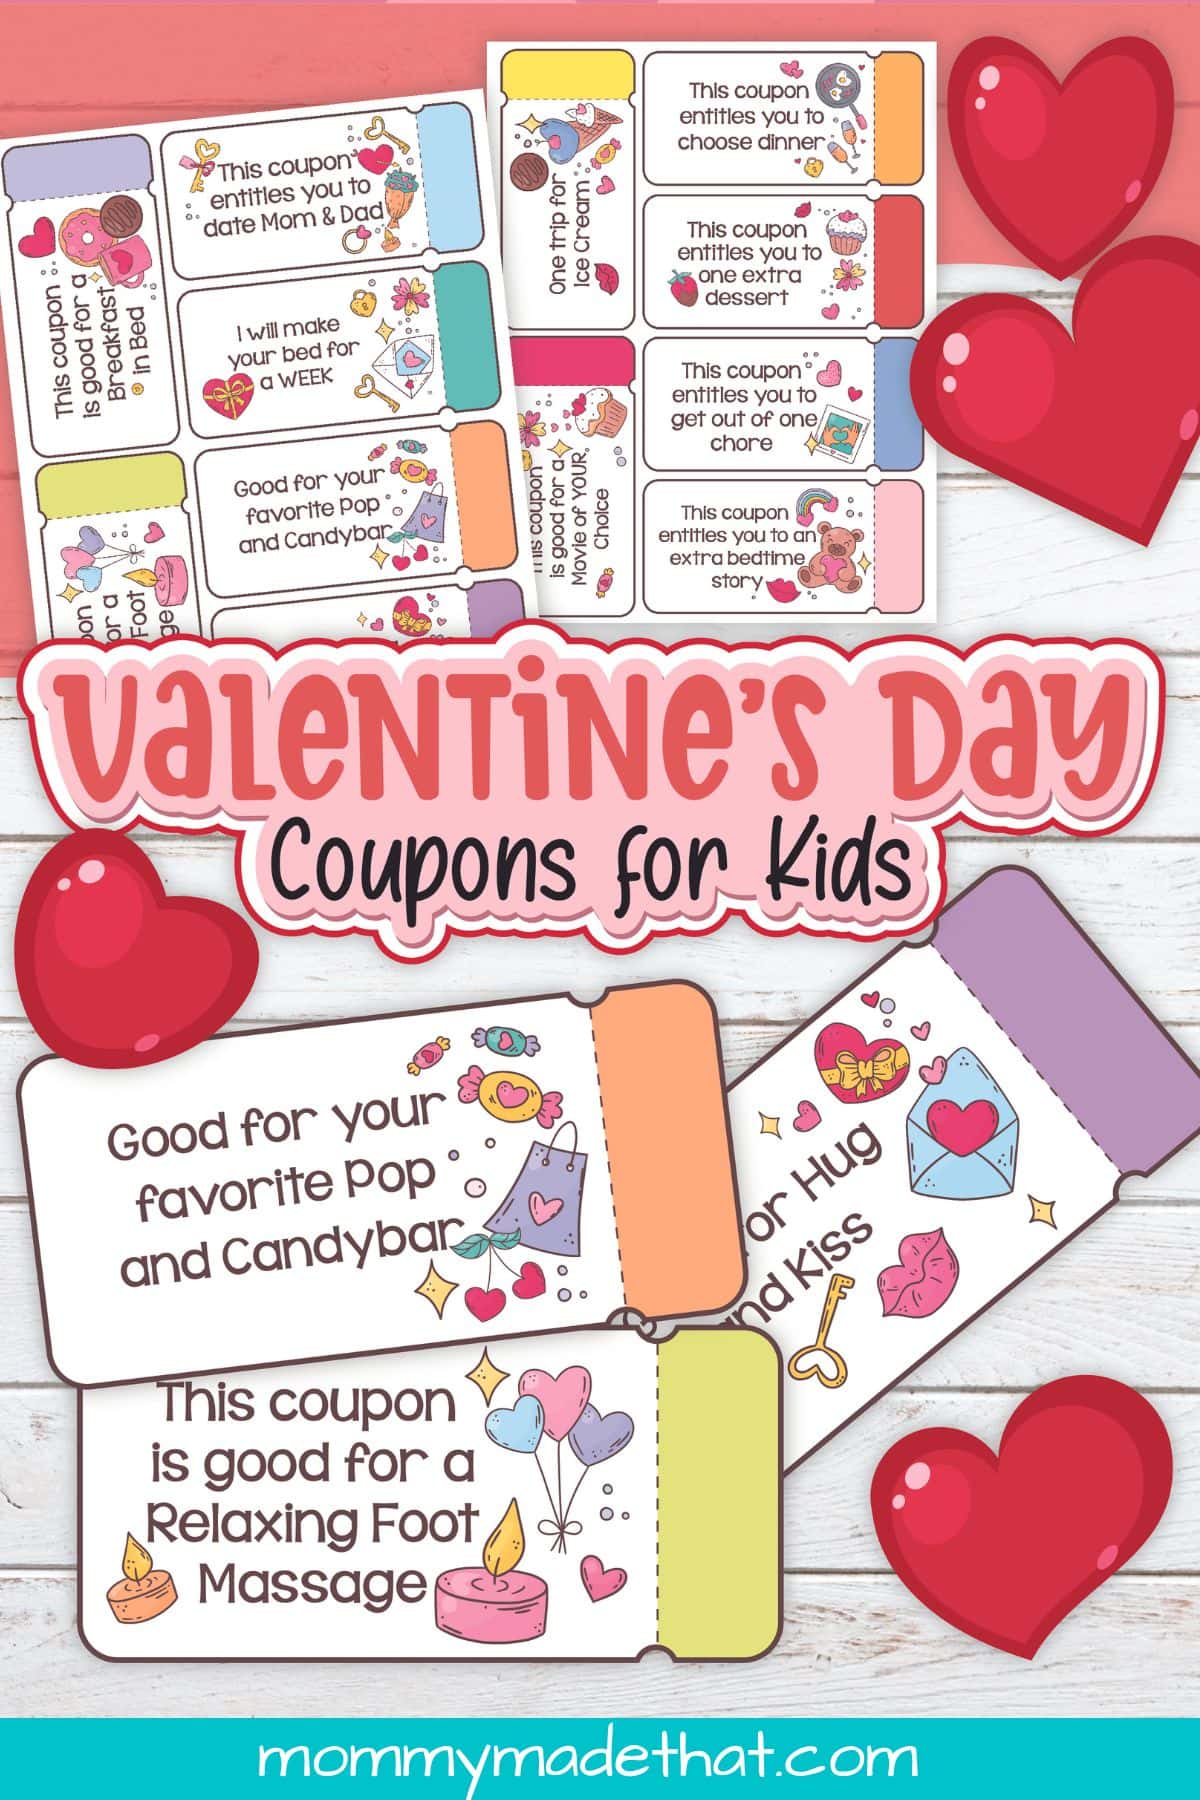 Valentine's day coupons for kids